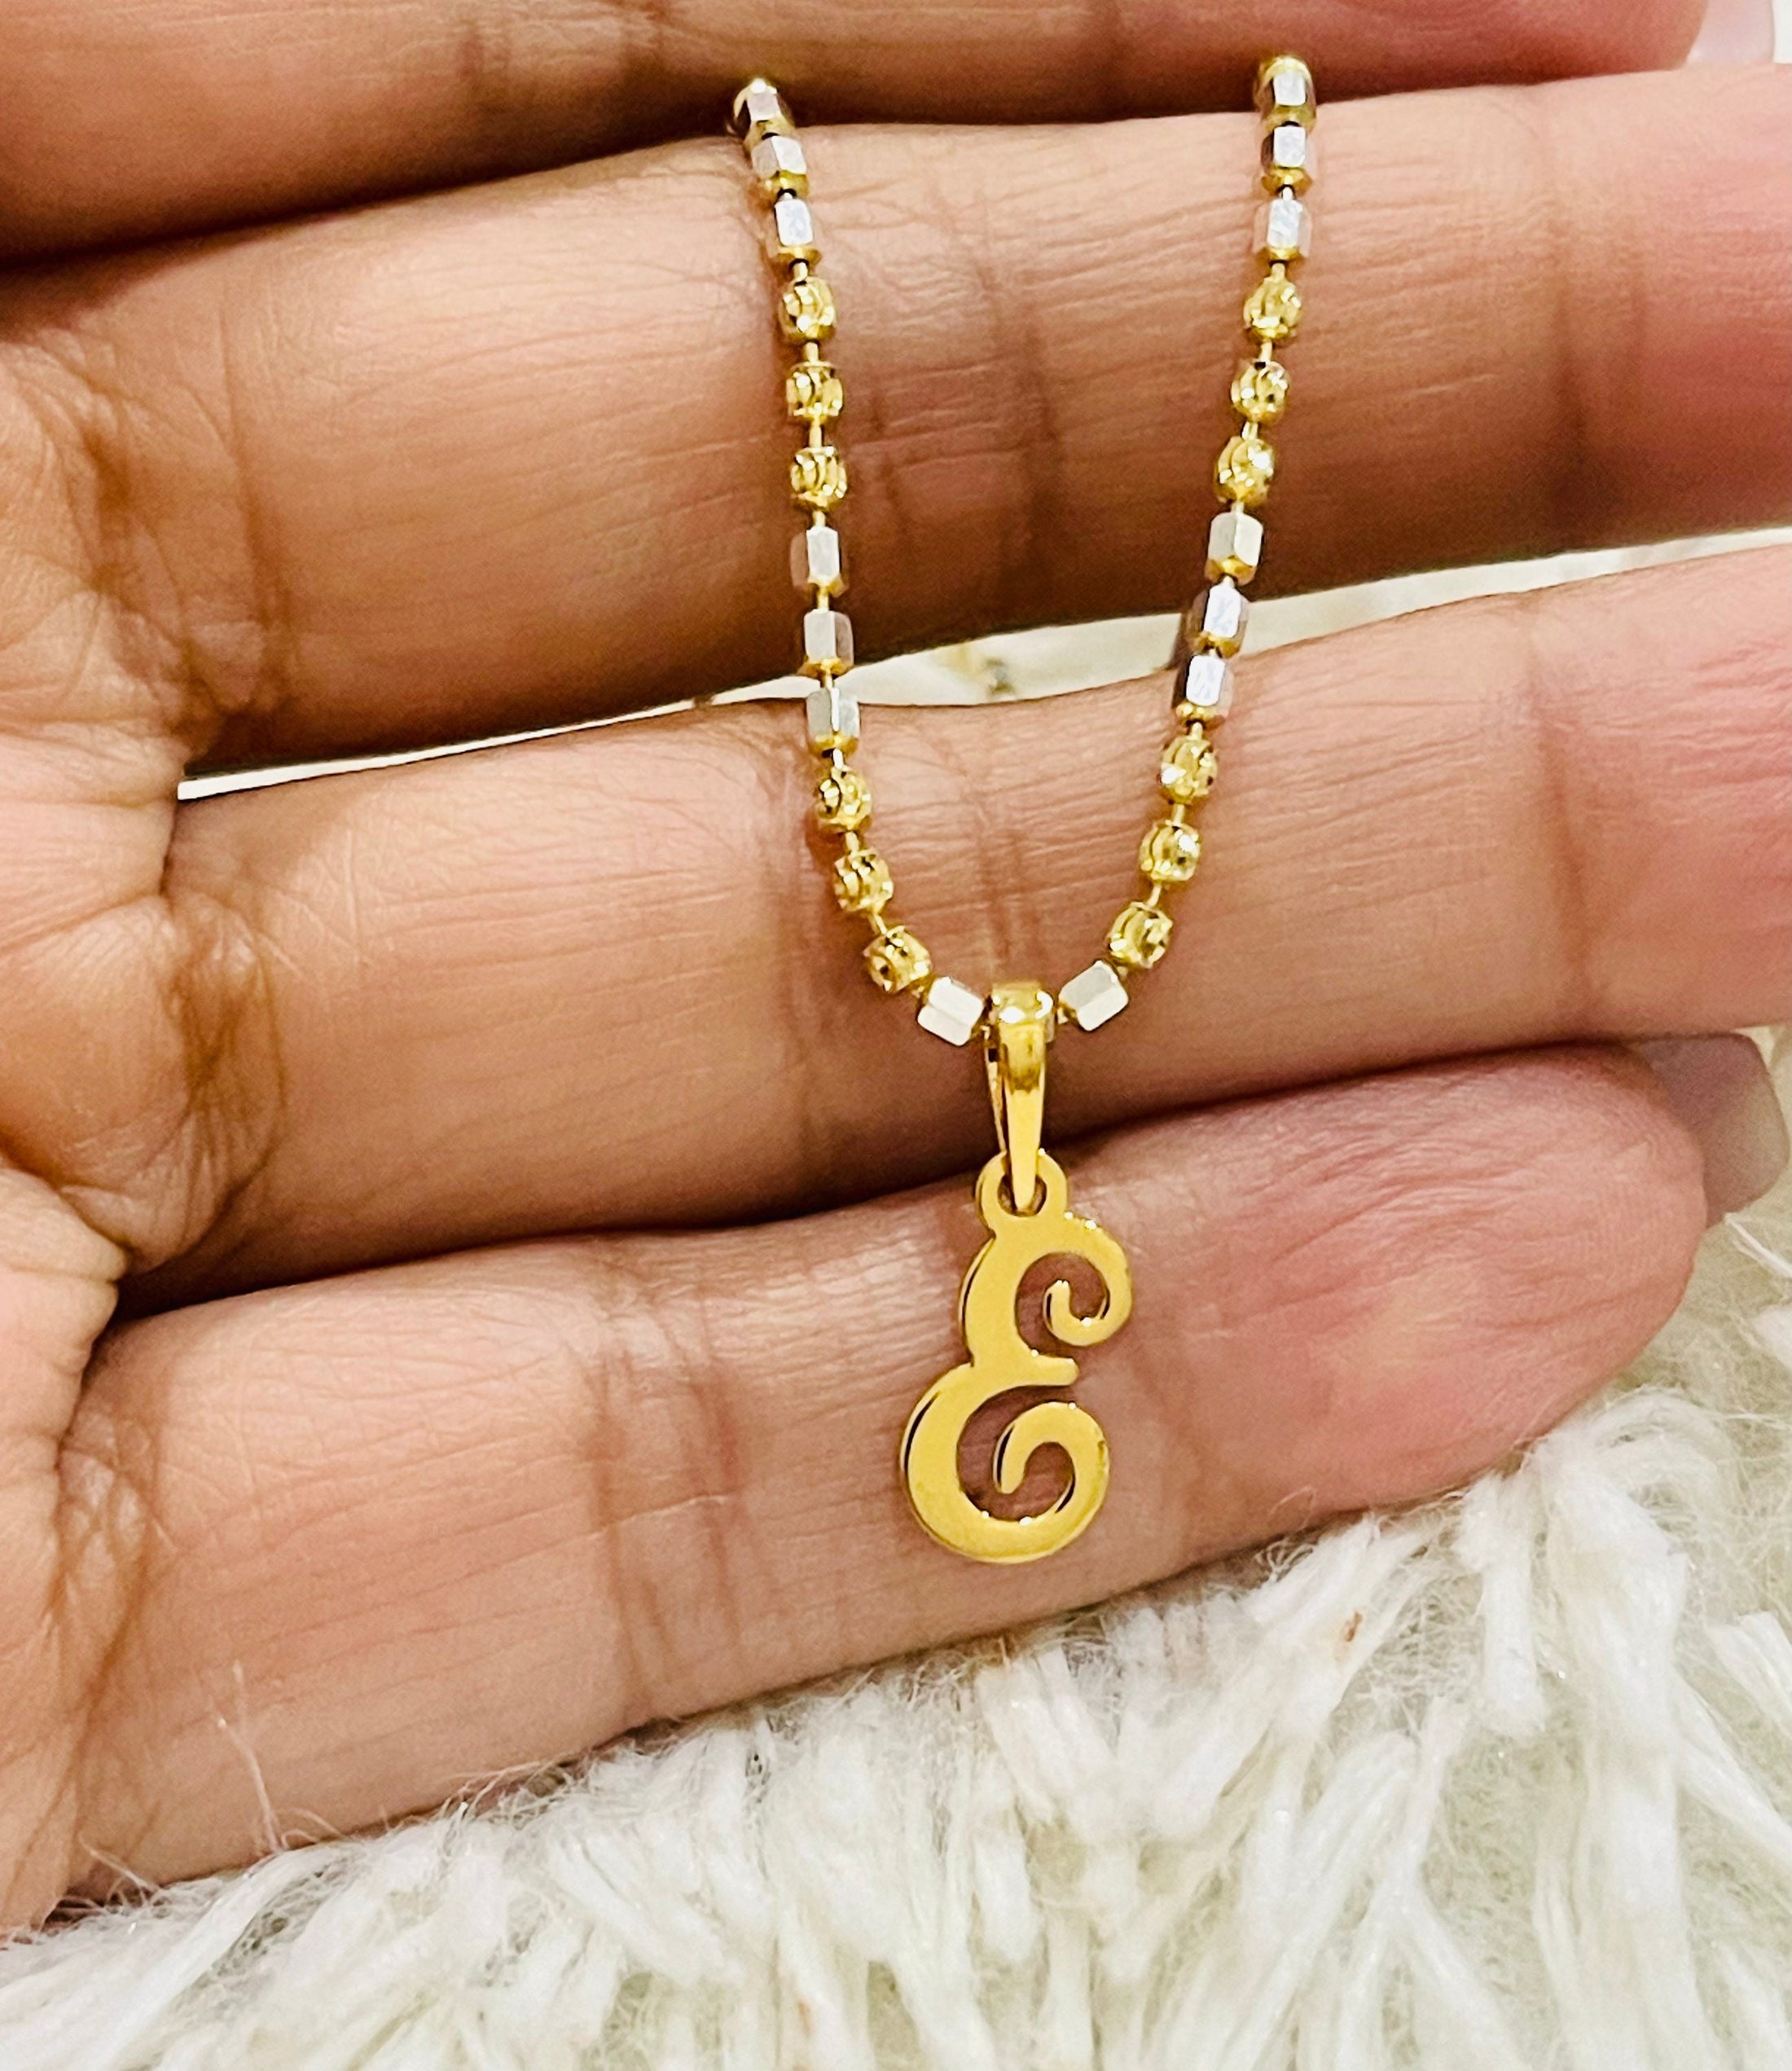 Custom Initial Necklace - Block Initial Charm Necklace - Gold Letter Pendant - Personalized Jewelry - Gift for Her - Gift for all ages - HOT